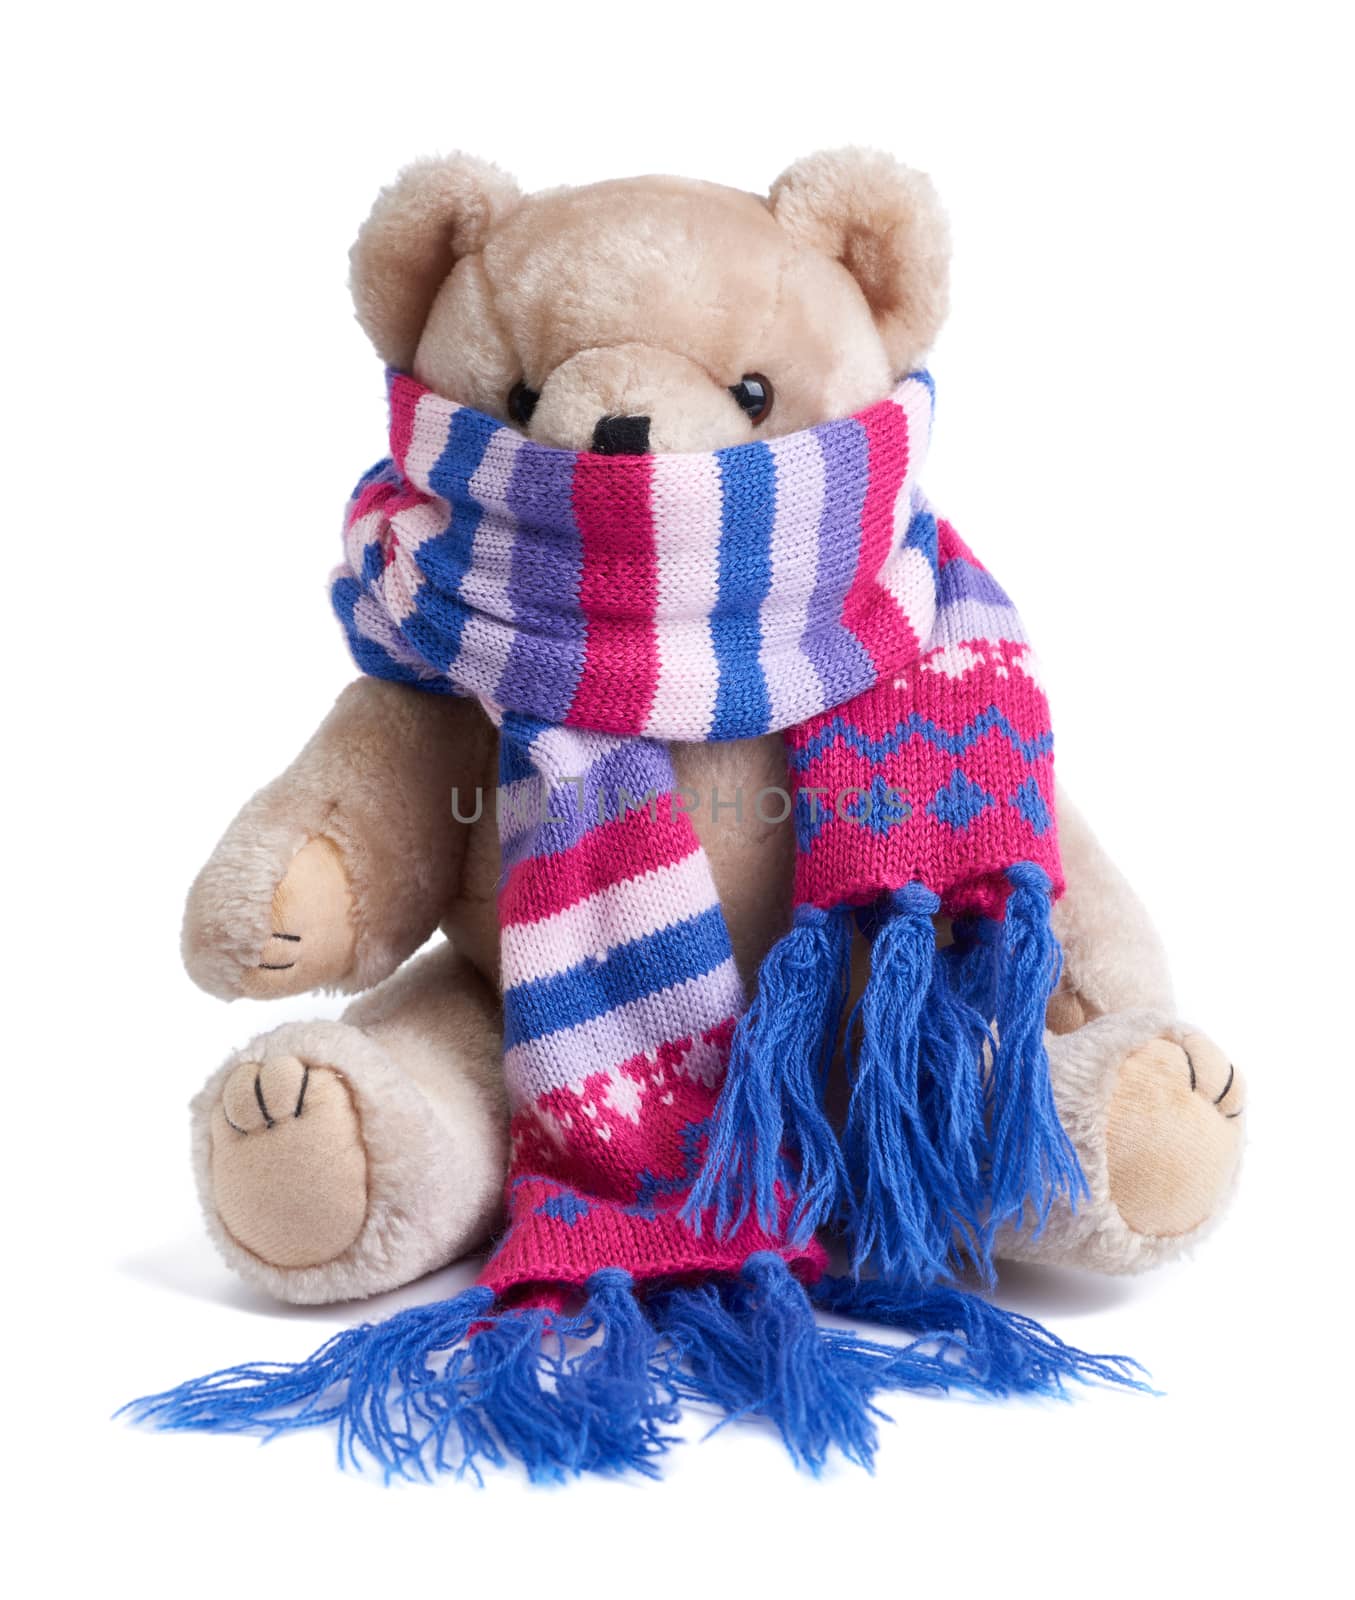 cute brown teddy bear in a colored knitted scarf sitting on a white background, close up